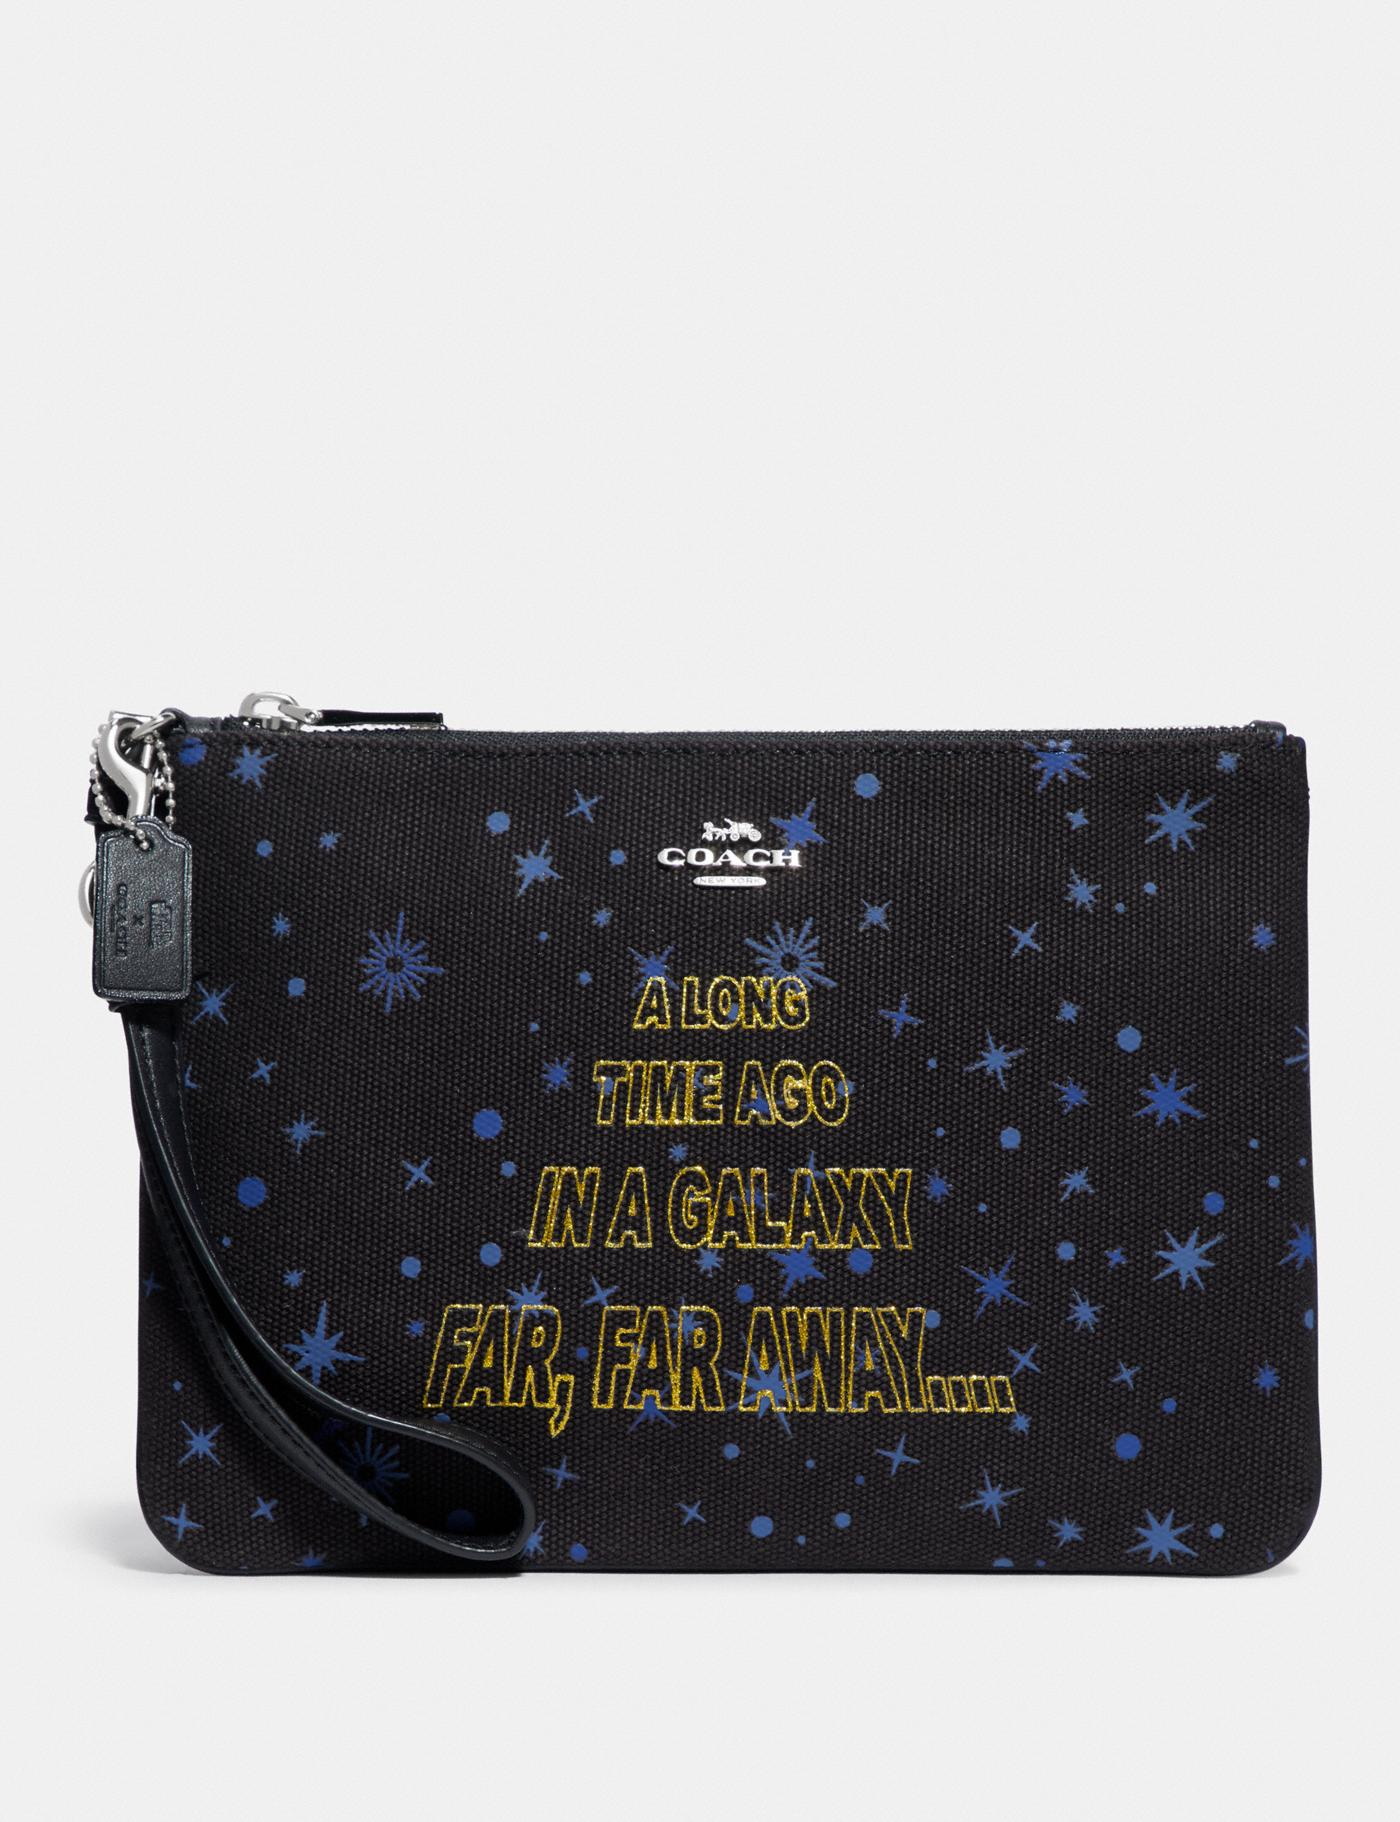 Coach x Star Wars 2019 Collection